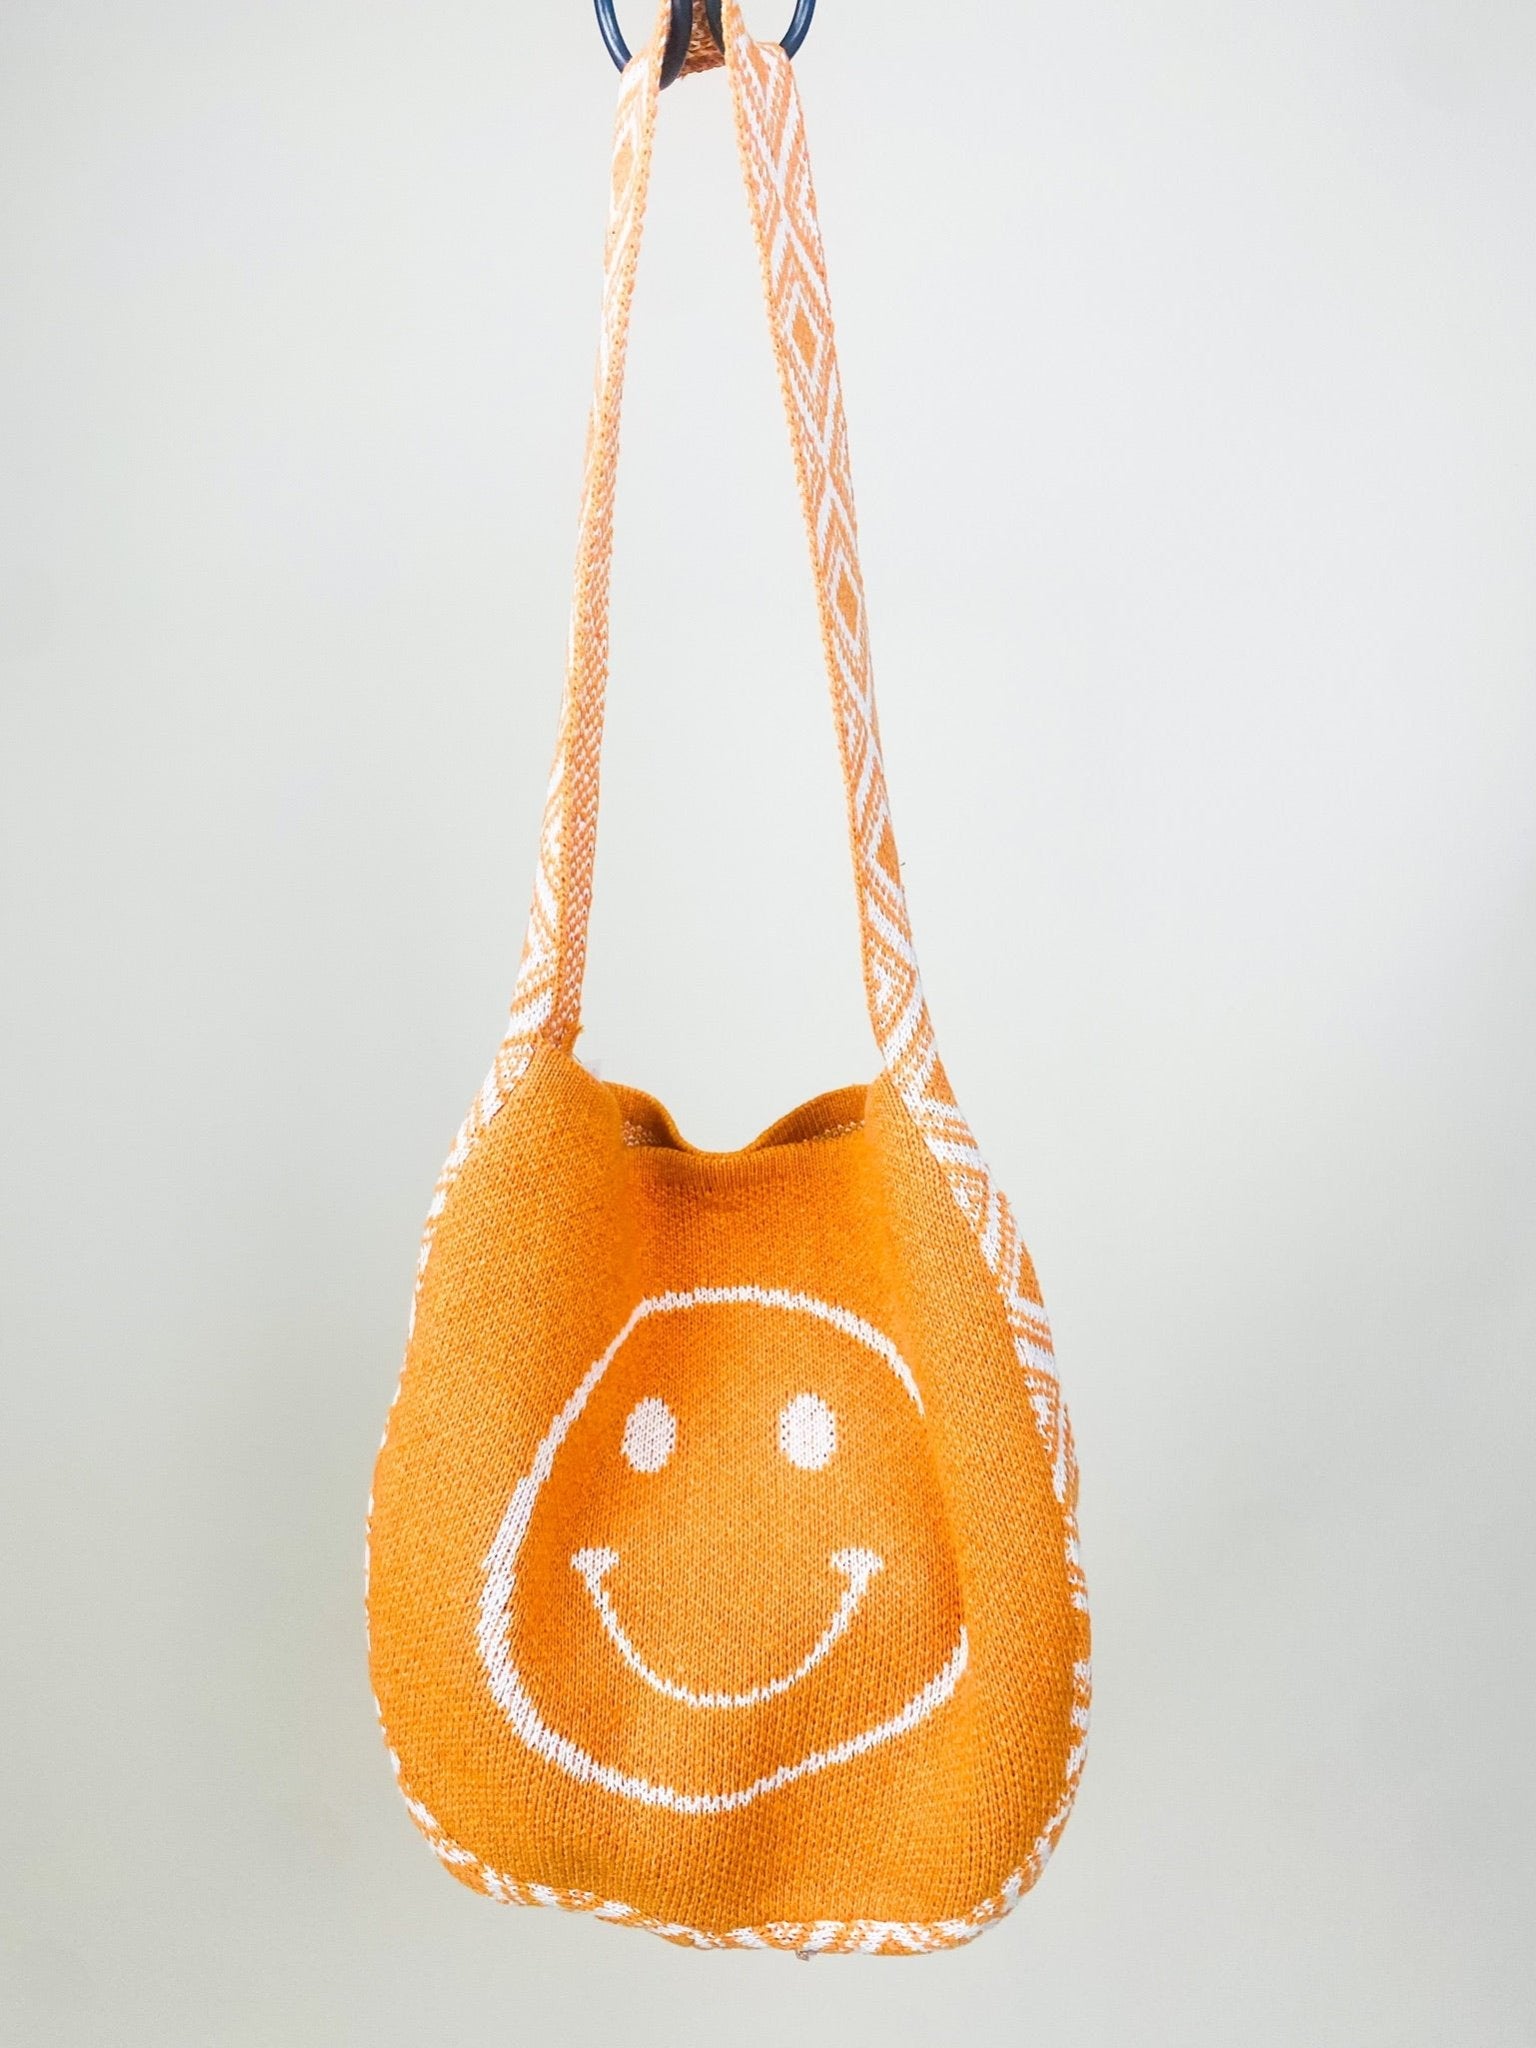 Smiley face geo woven bag orange - Stylish bag - Trendy Summer Lake T-Shirts and Tank Tops at Lush Fashion Lounge Boutique in Oklahoma City